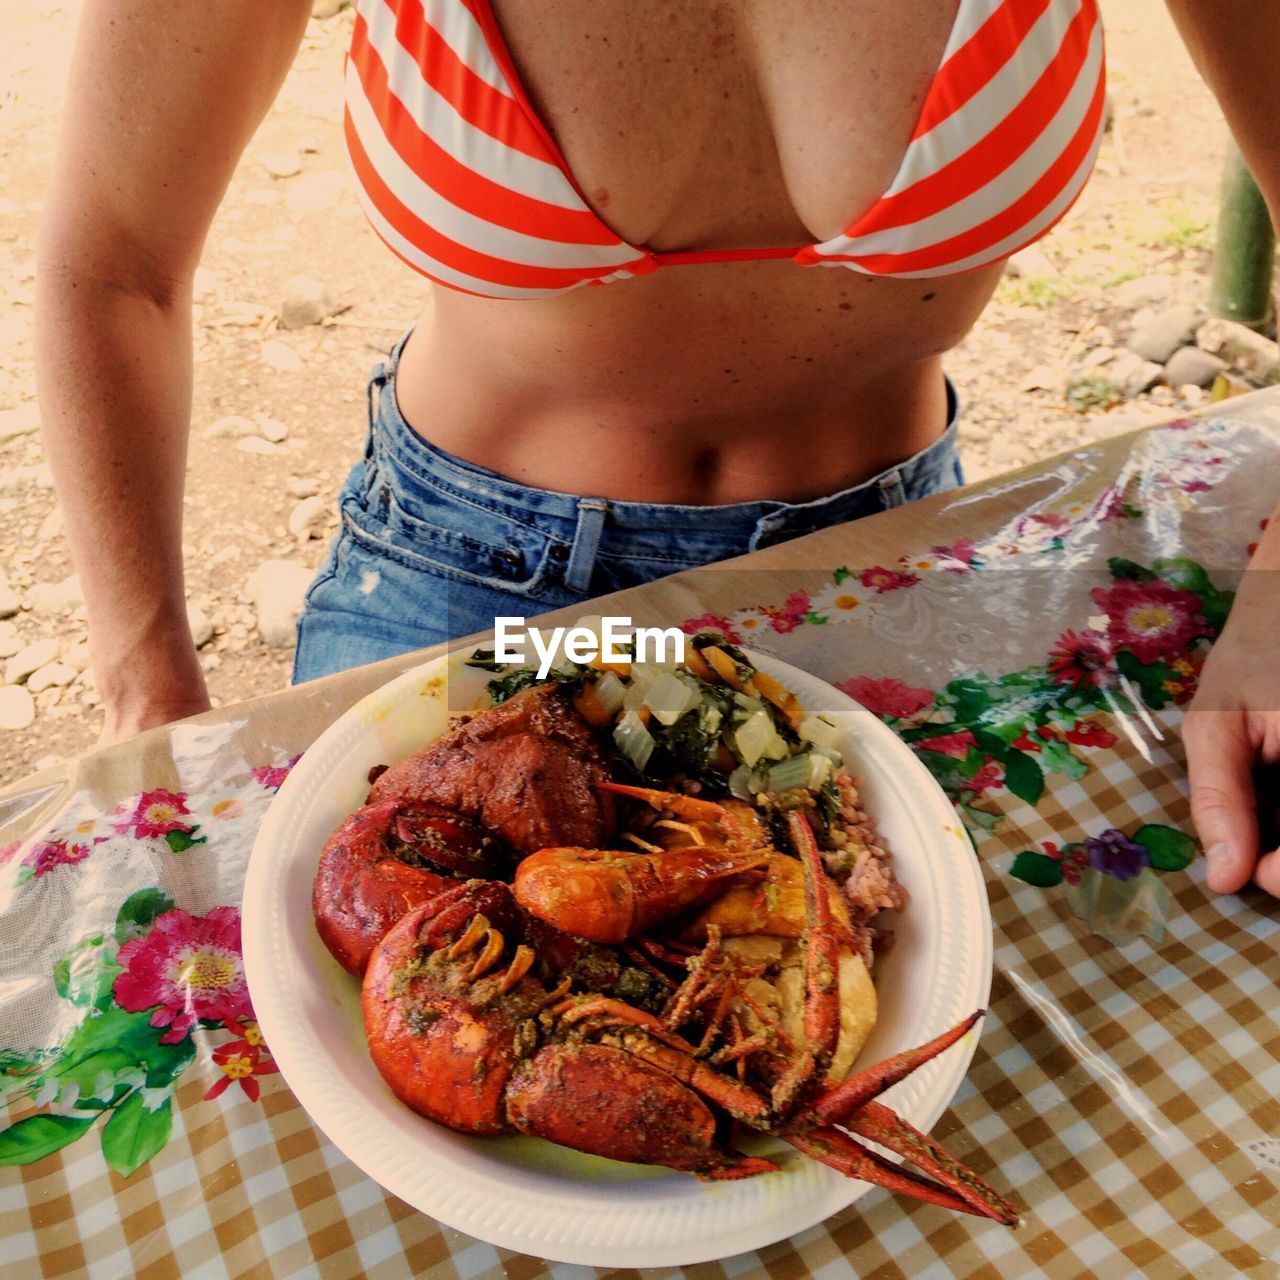 Midsection of woman in bikini top with cooked crayfish served on table